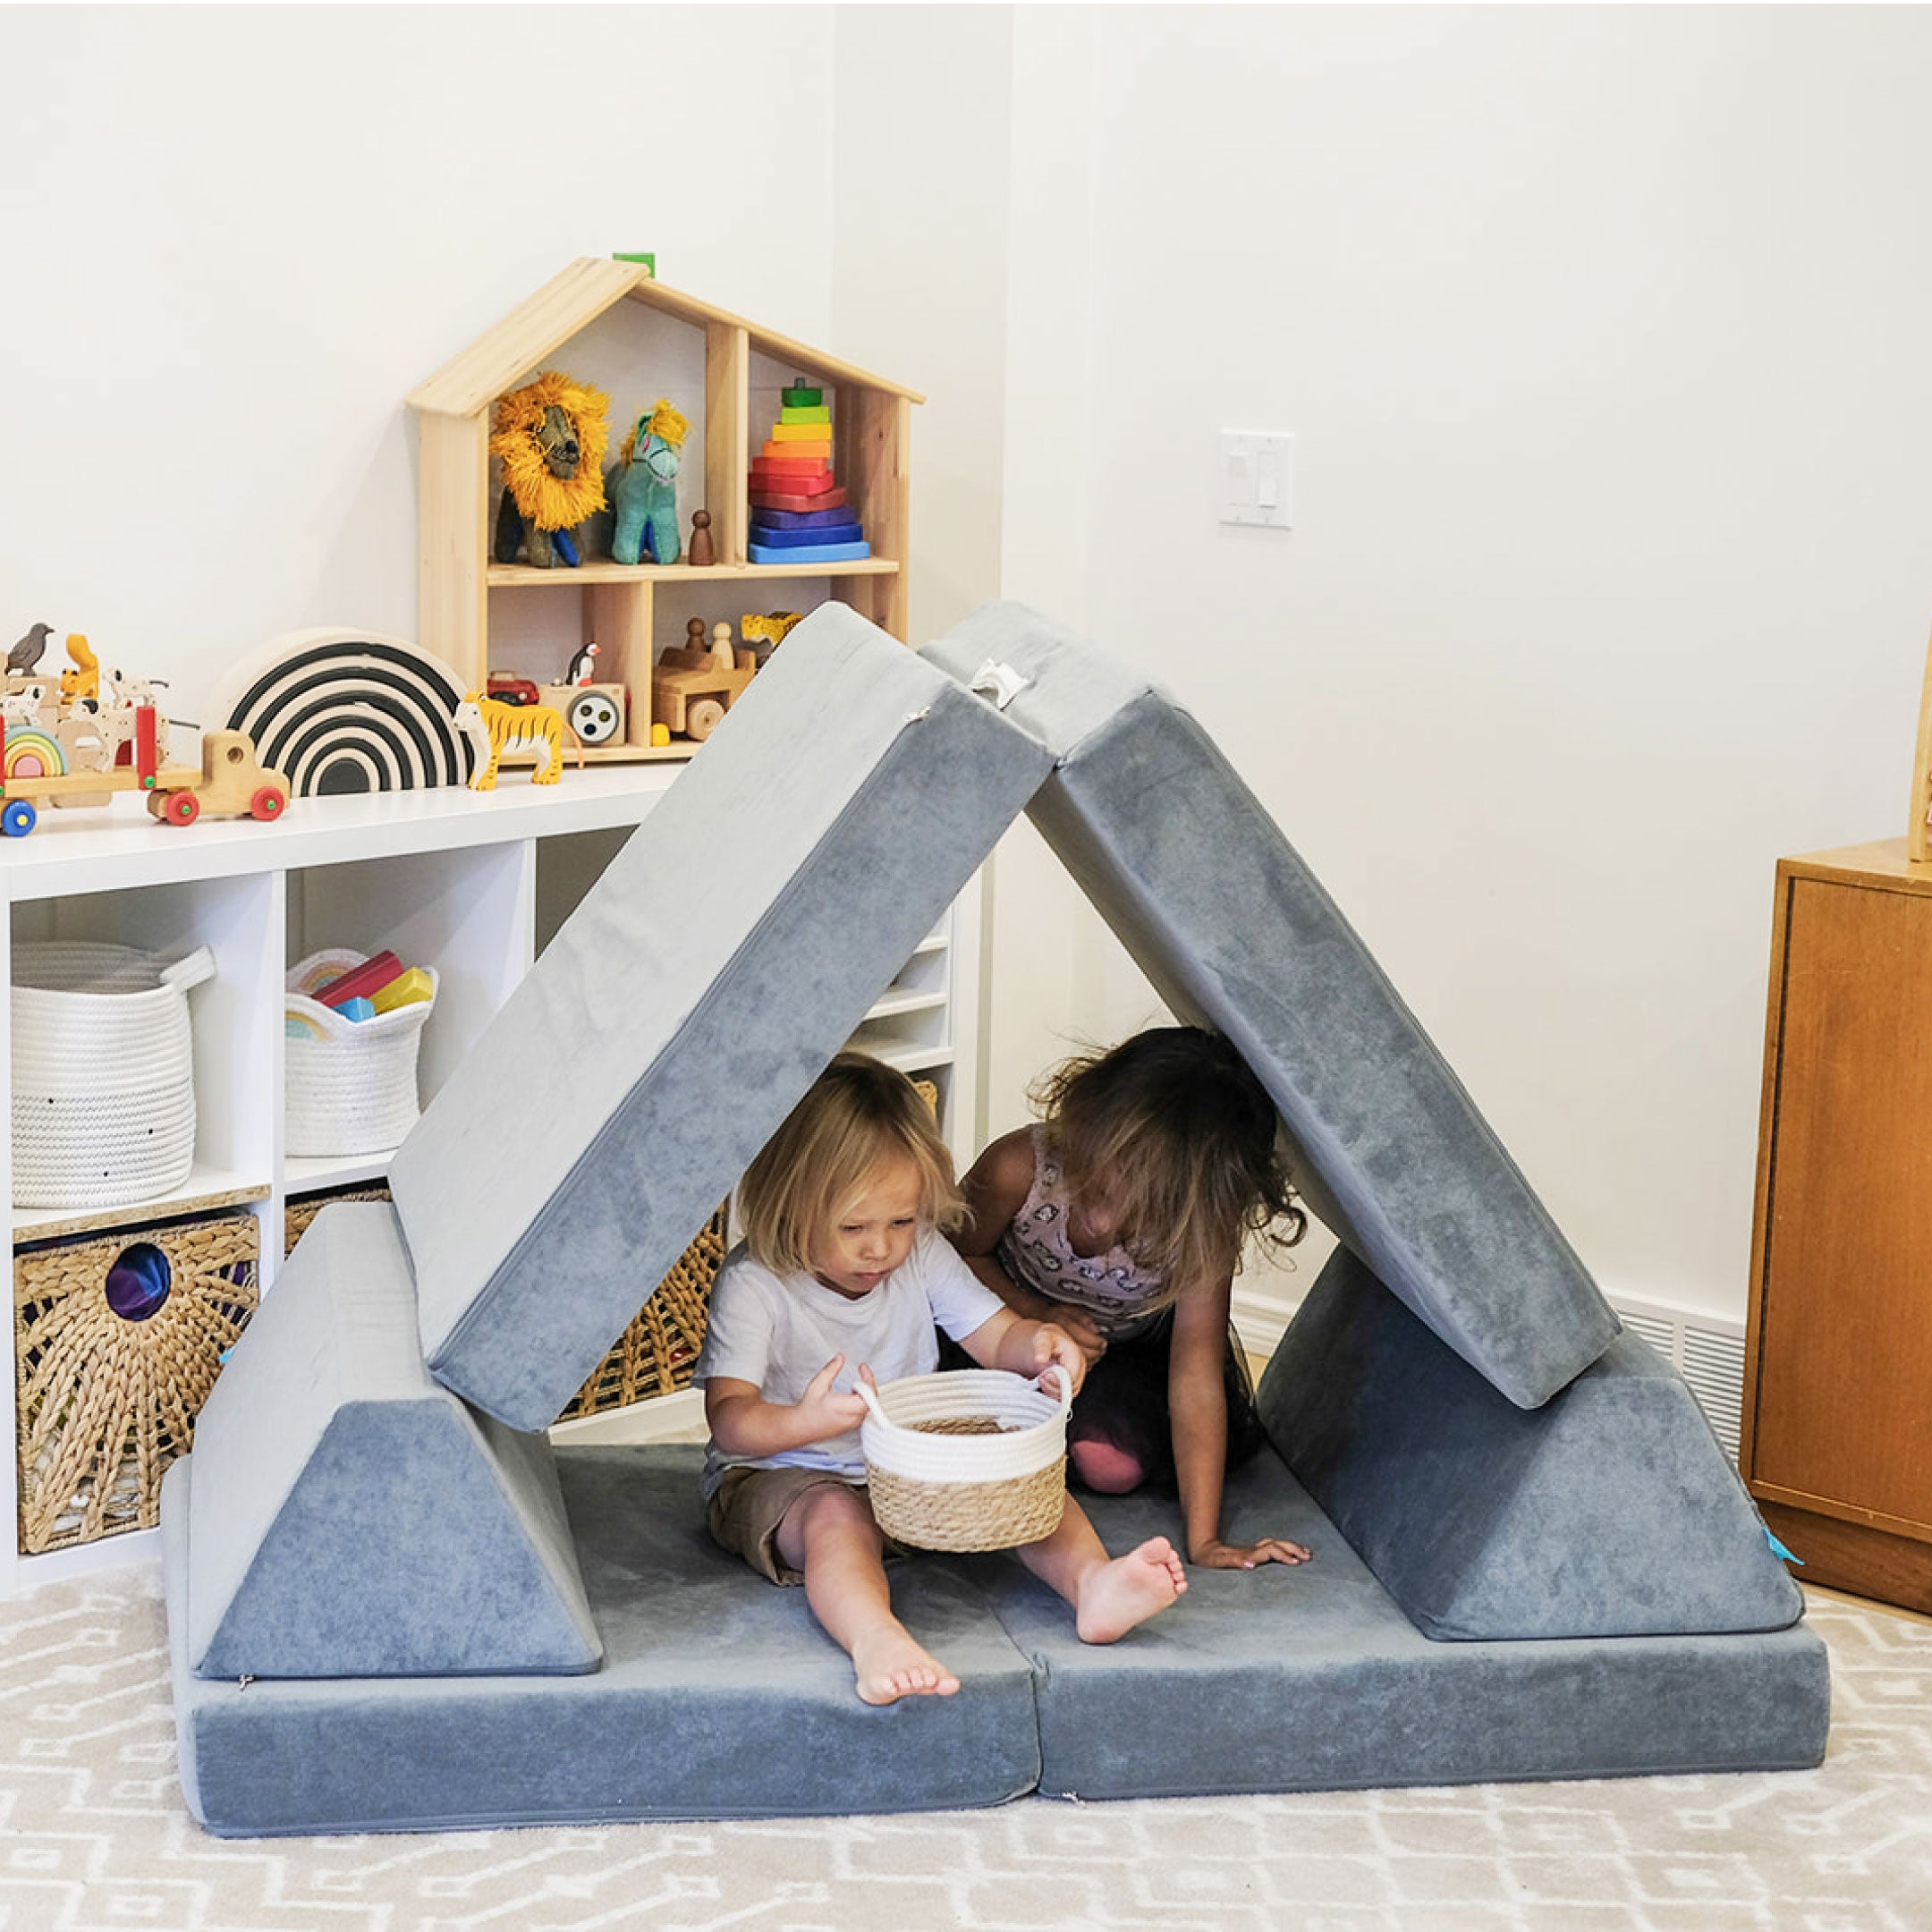 two kids looking at a basket with toys while inside a play couch in the shape of a house